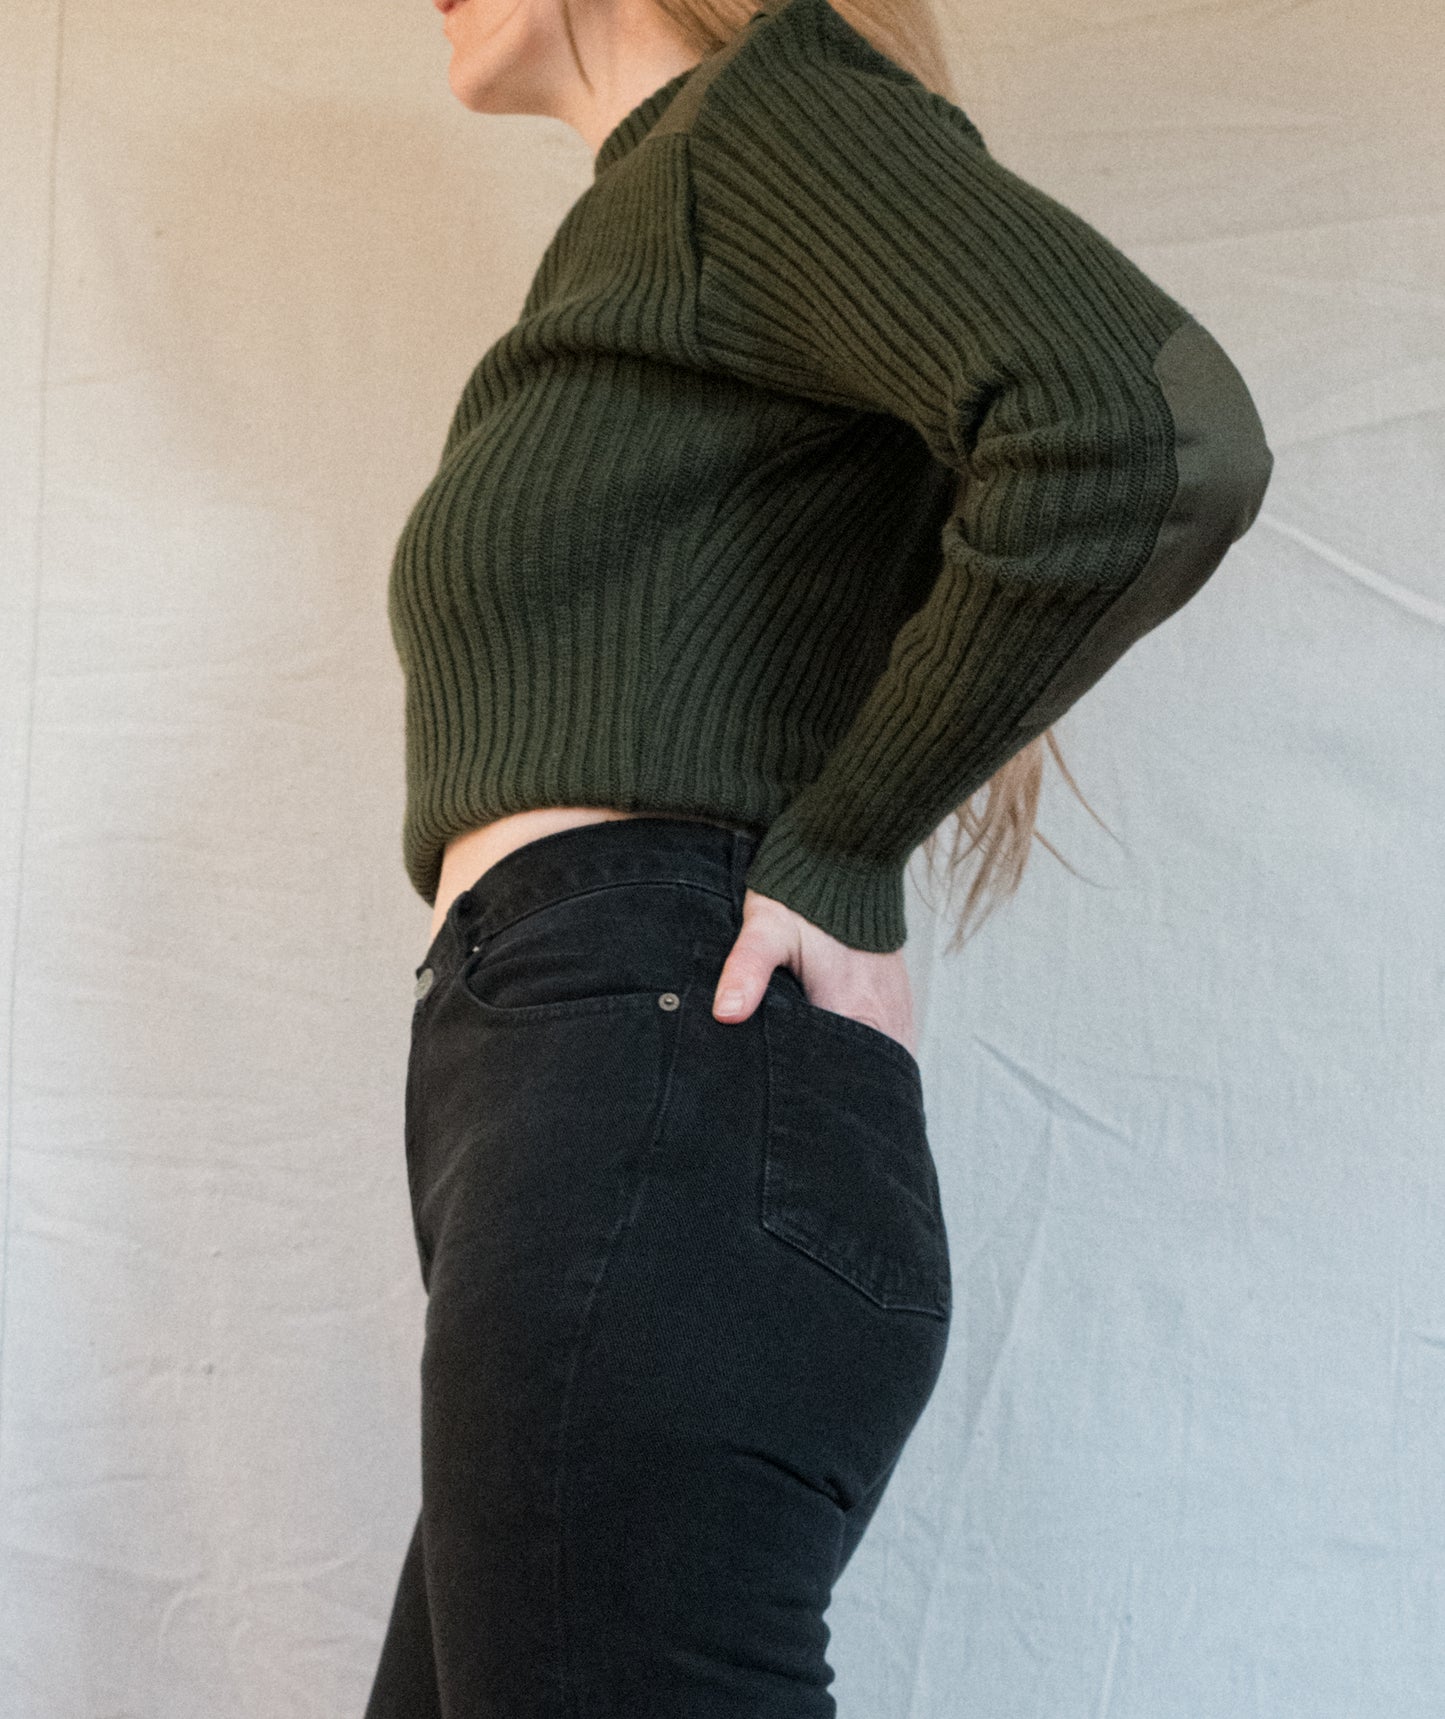 Vintage Knit Military Sweater (XS/S)